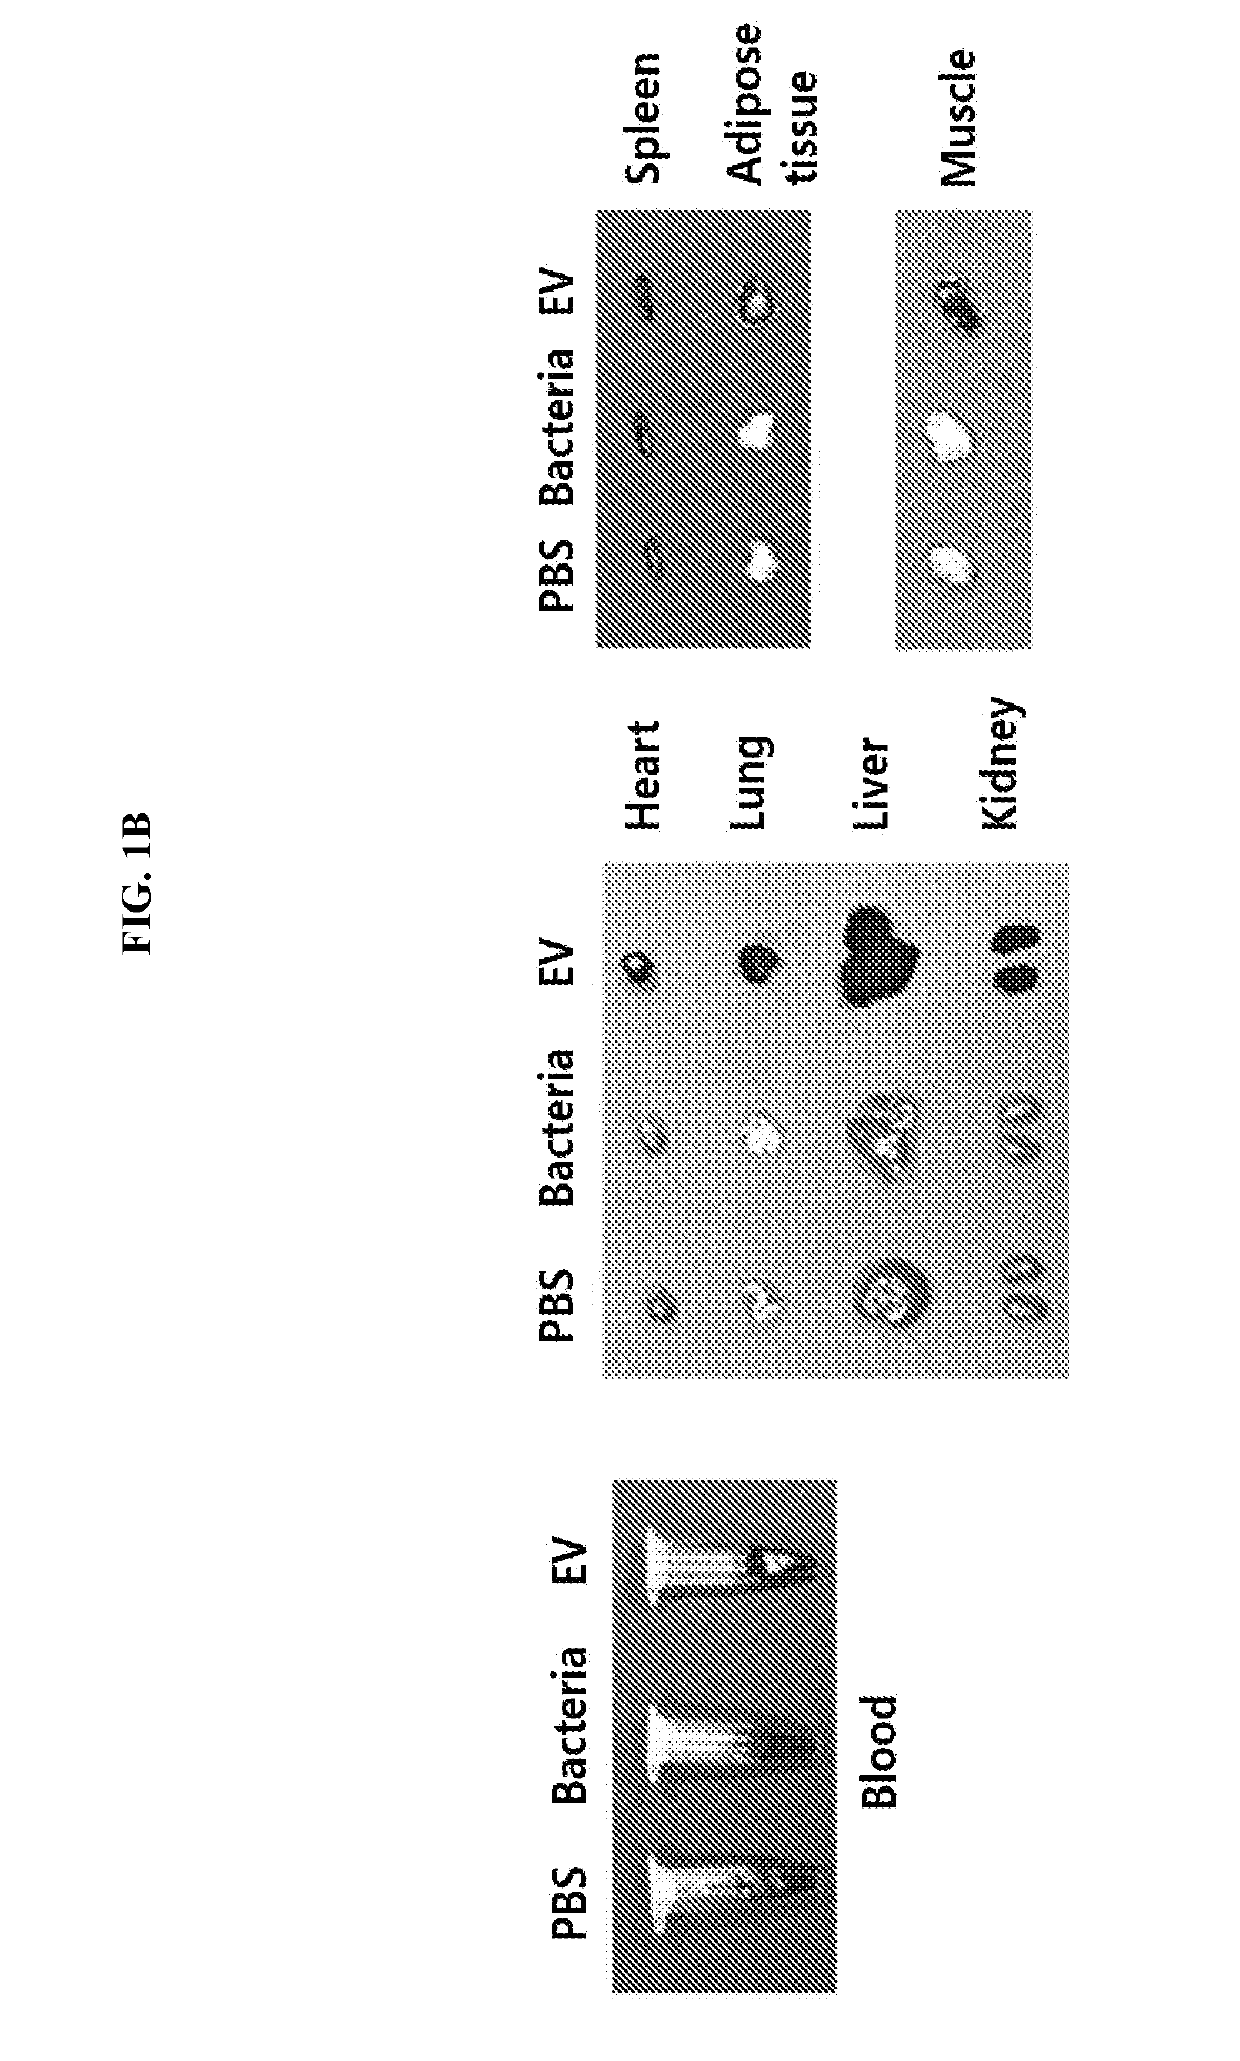 Nano-vesicles derived from genus morganella bacteria and use thereof